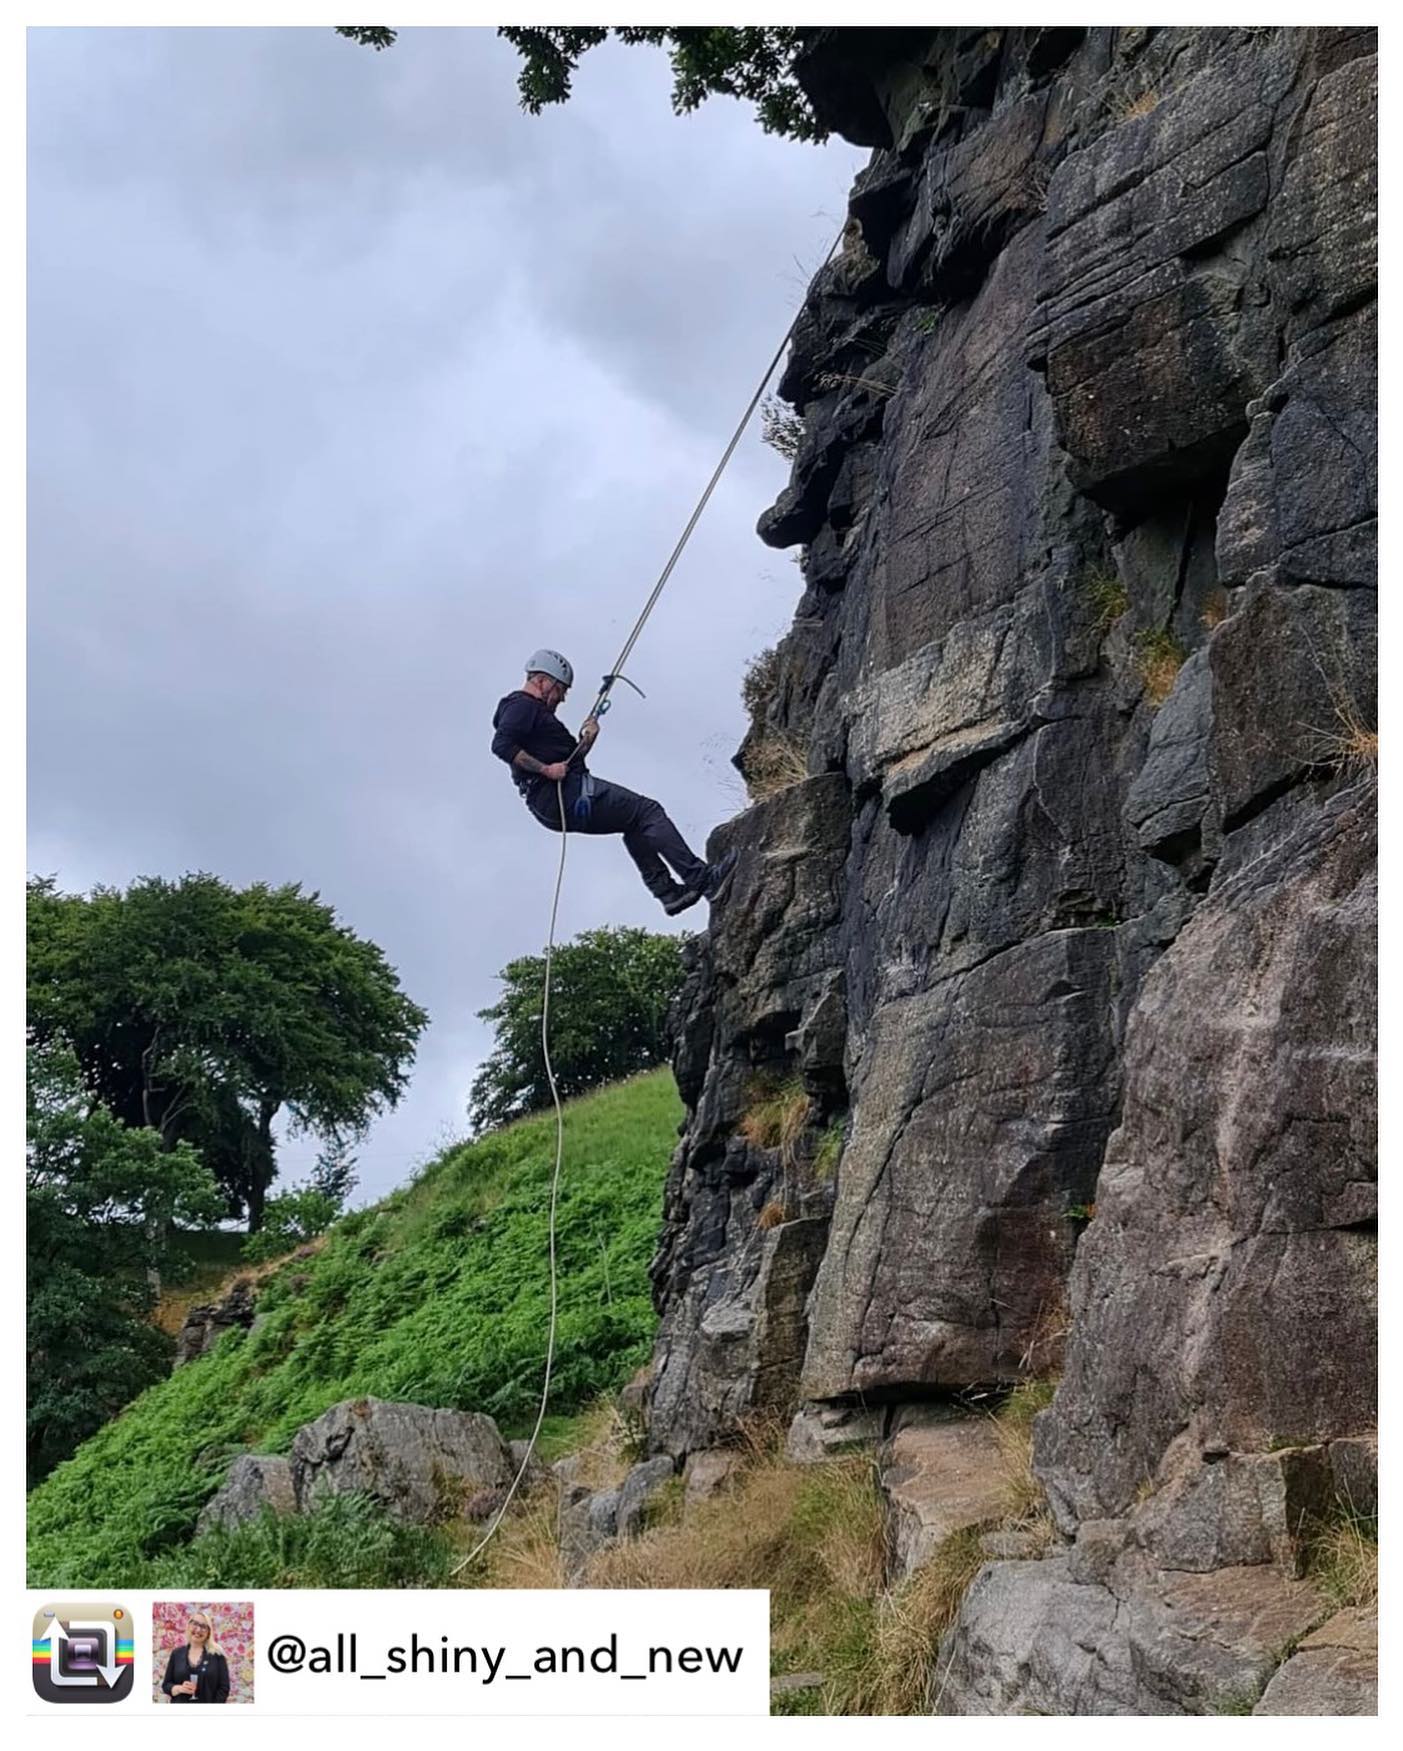 Repost from @all_shiny_and_new - We had the best time with Will and Dan from @wilderness_development doing abseiling today at Darwen. We will definitely be back. Every person was made to feel comfortable and at ease during the session. Thank you so very much 
💚💚💚

We love gettting your feedback and such a great day with you all 

More info and booking at www.wilderness-development.com, link in our bio 🧗‍♀️⛰🧗‍♀️
.
.
.
#wildernessdevelopment #smallbusiness #rockclimbing #climbing #scrambling #abseiling #trysomethingnew #peakdistrict #peakdistrictnationalpark #peakdistrictclimbing #mountainsfellsandhikes #roamtheuk #outdoorpursuits #outdooradventures #outdooractivities #nationalparksuk #booknow